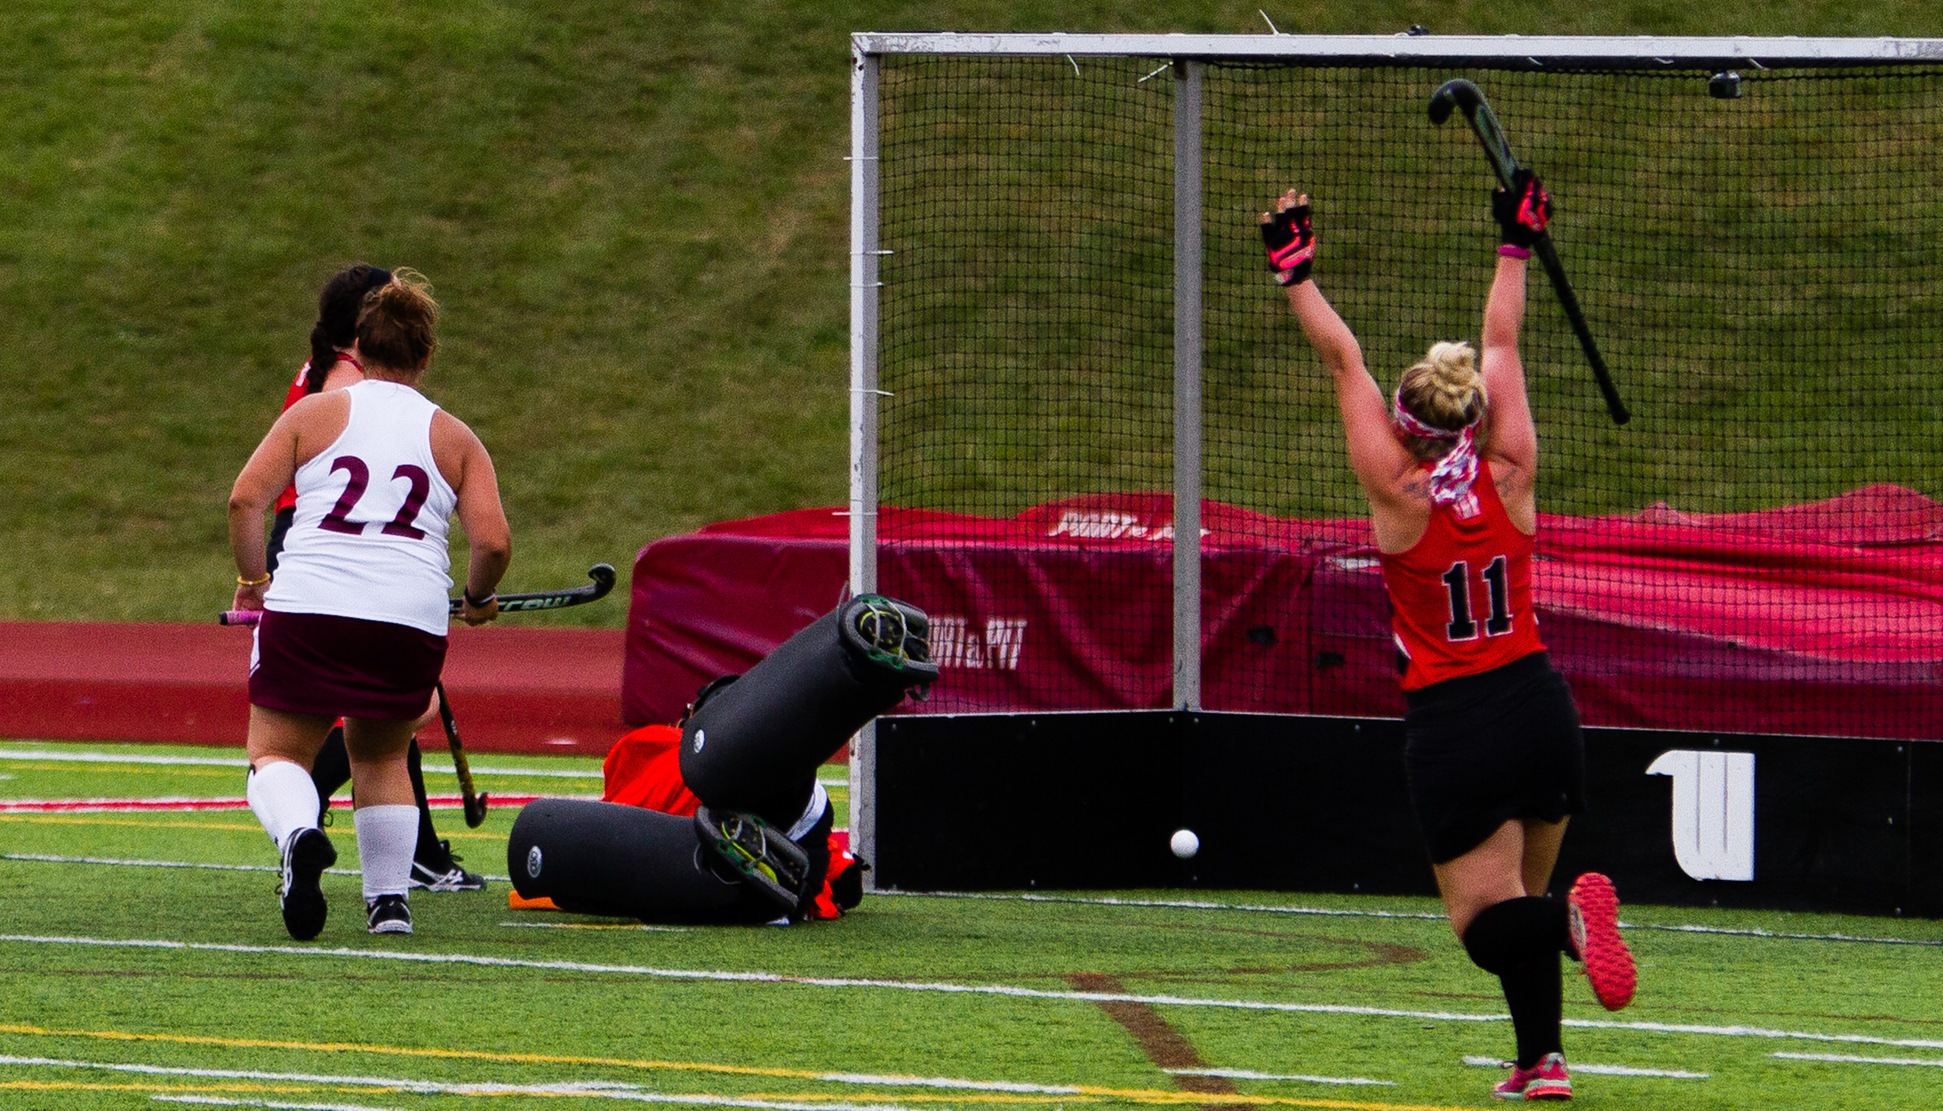 Junior Kayla Cull celebrates her game-winning goal in the Tigers' 3-2 win over Earlham - (Photo Courtesy of Trent Sprague '22)